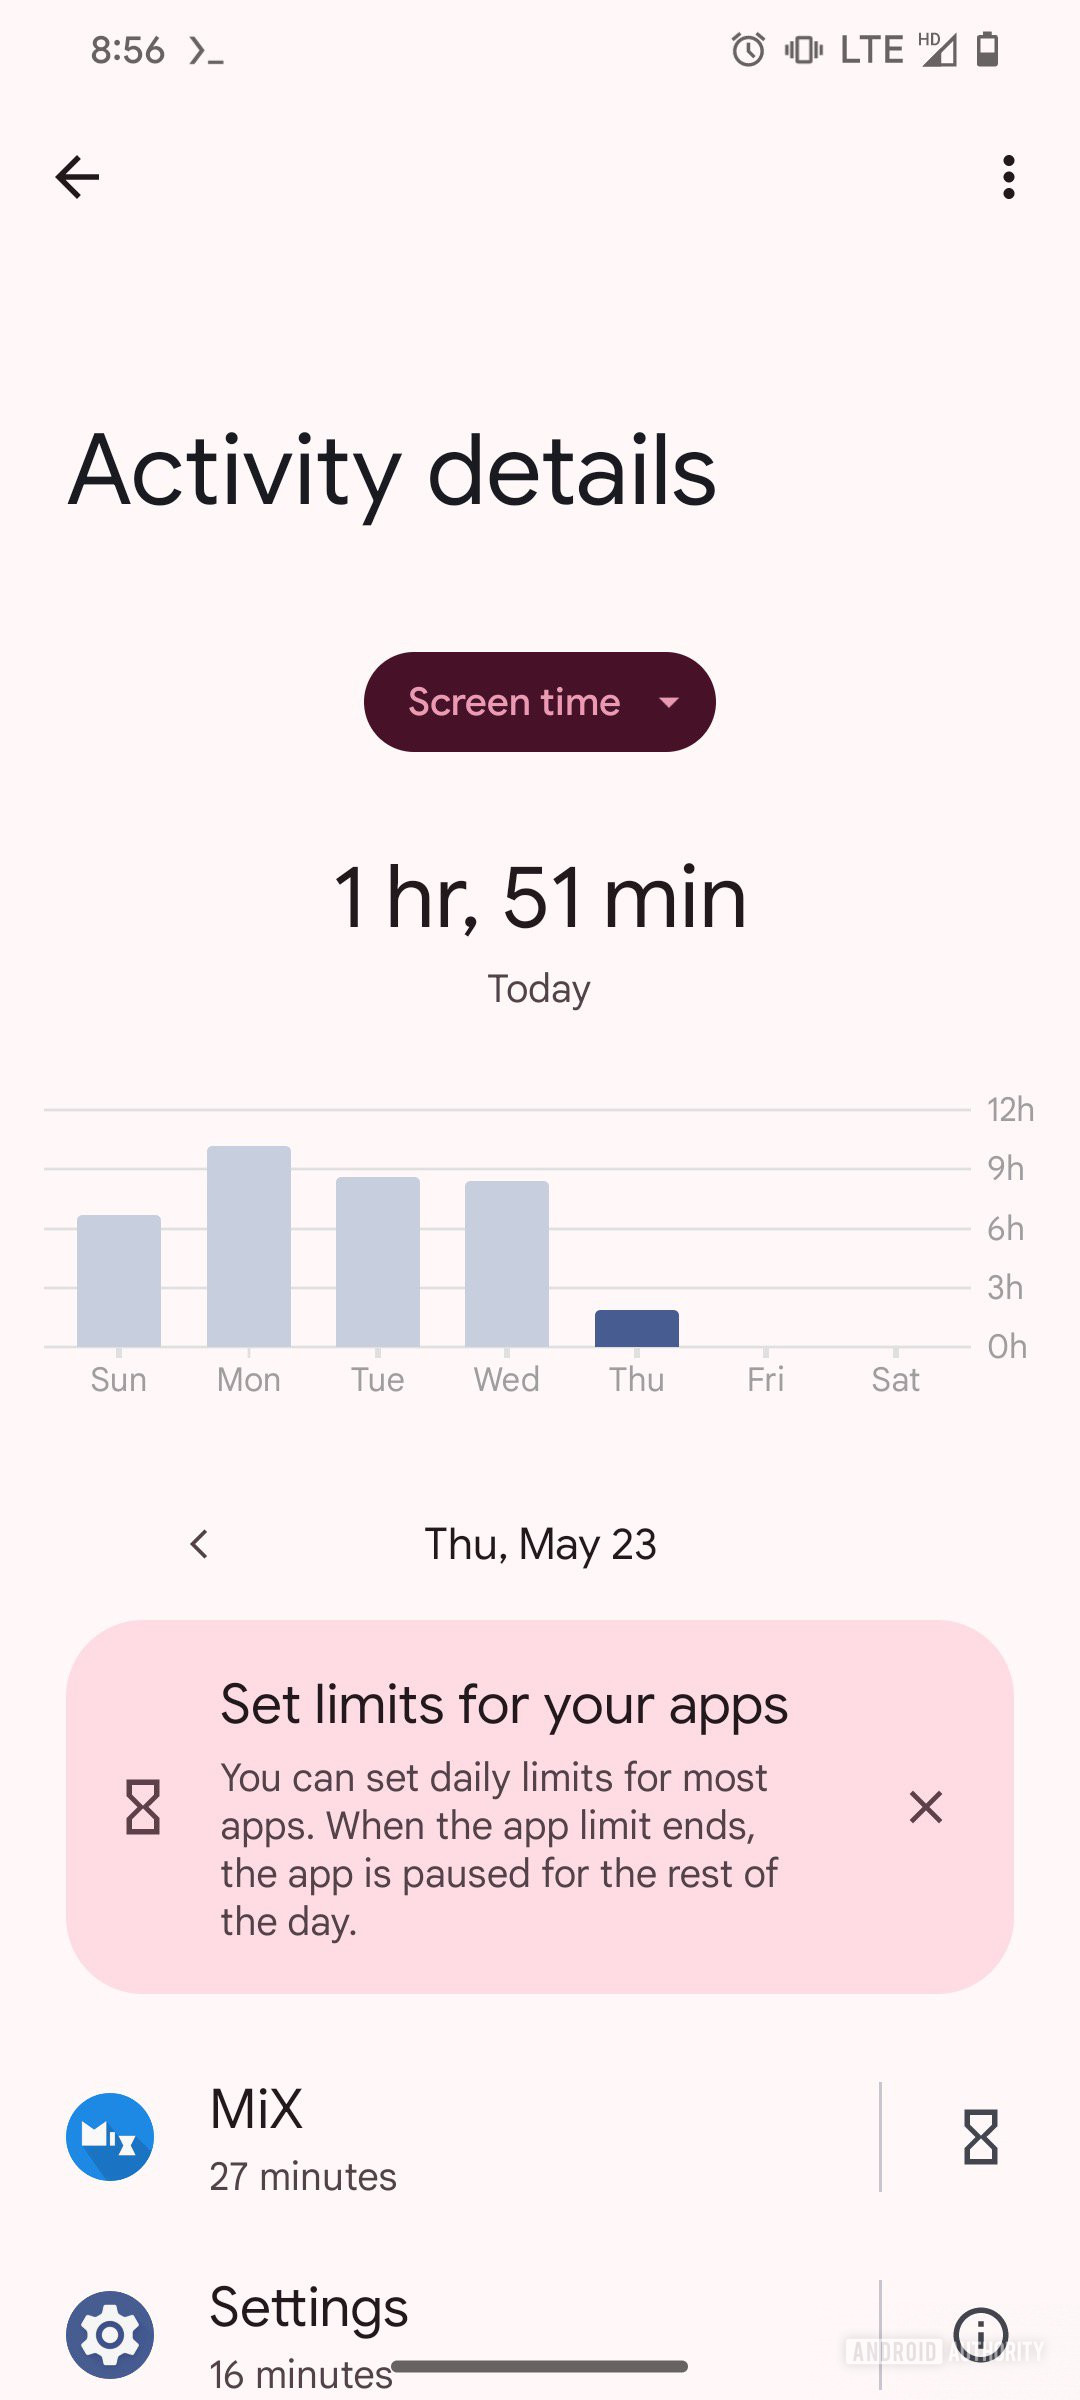 Digital Wellbeing Activity Details Section